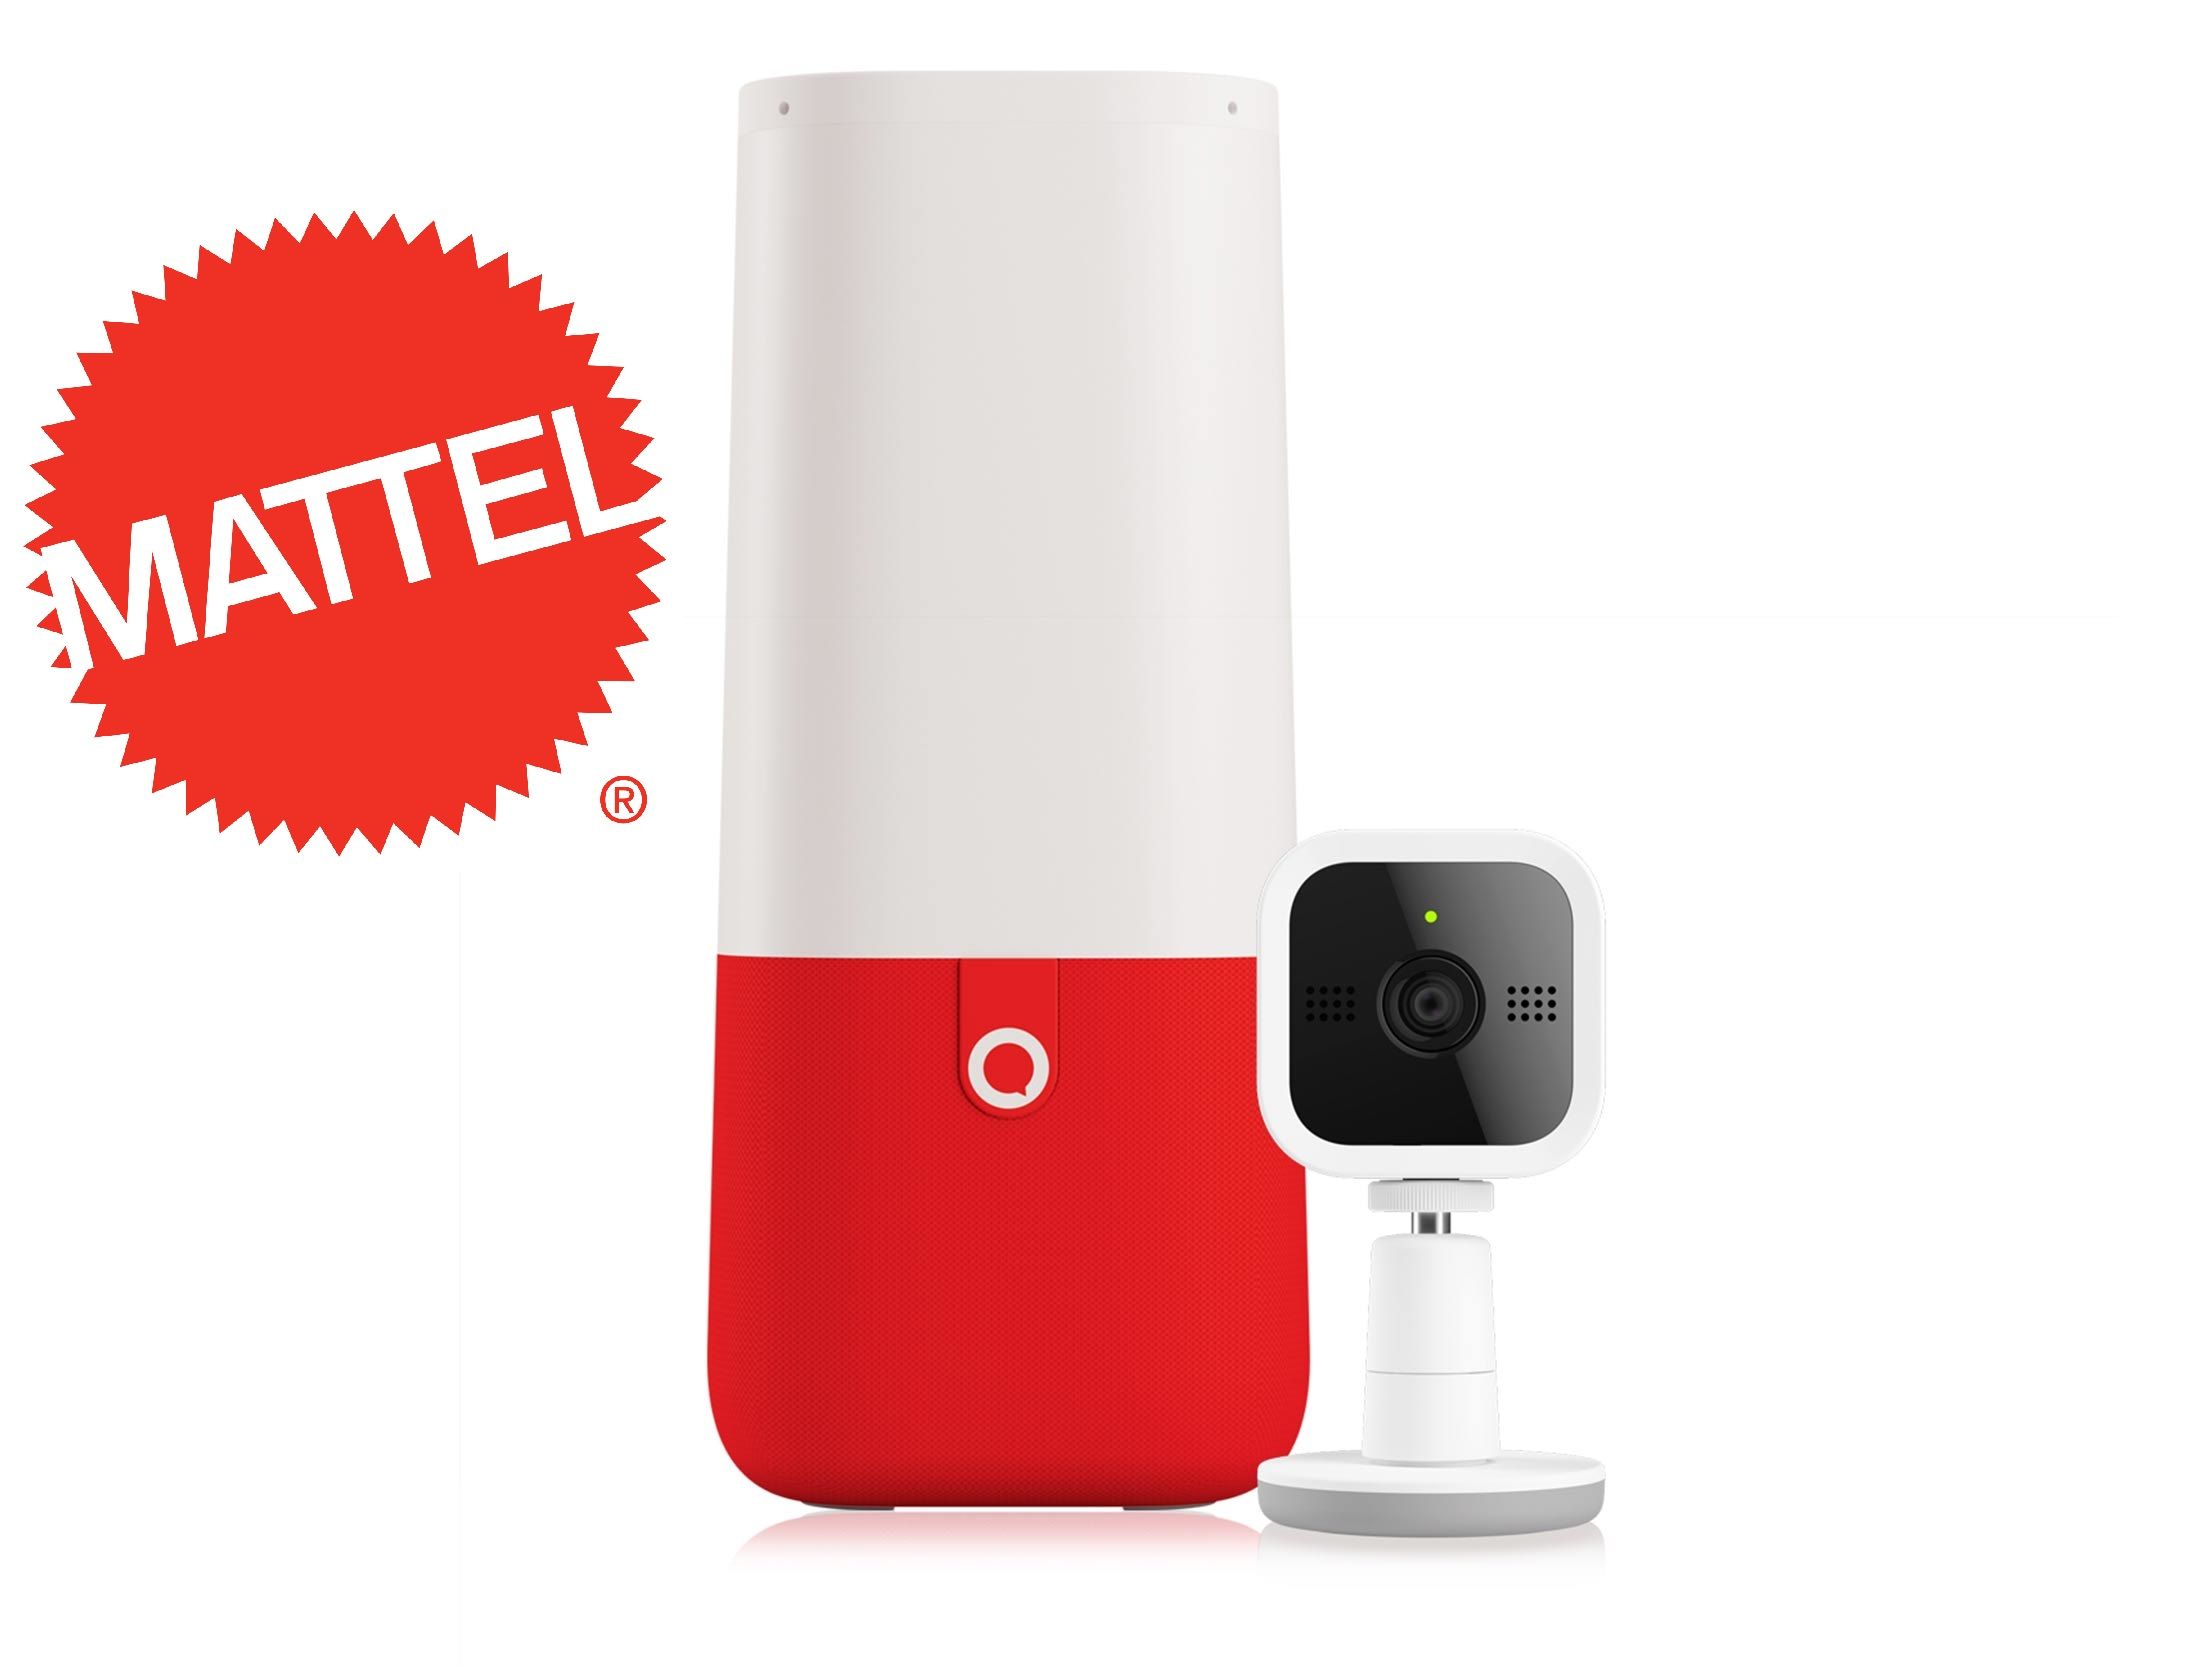 mattel’s aristotle is an amazon echo style speaker aimed squarely at your kids image 1